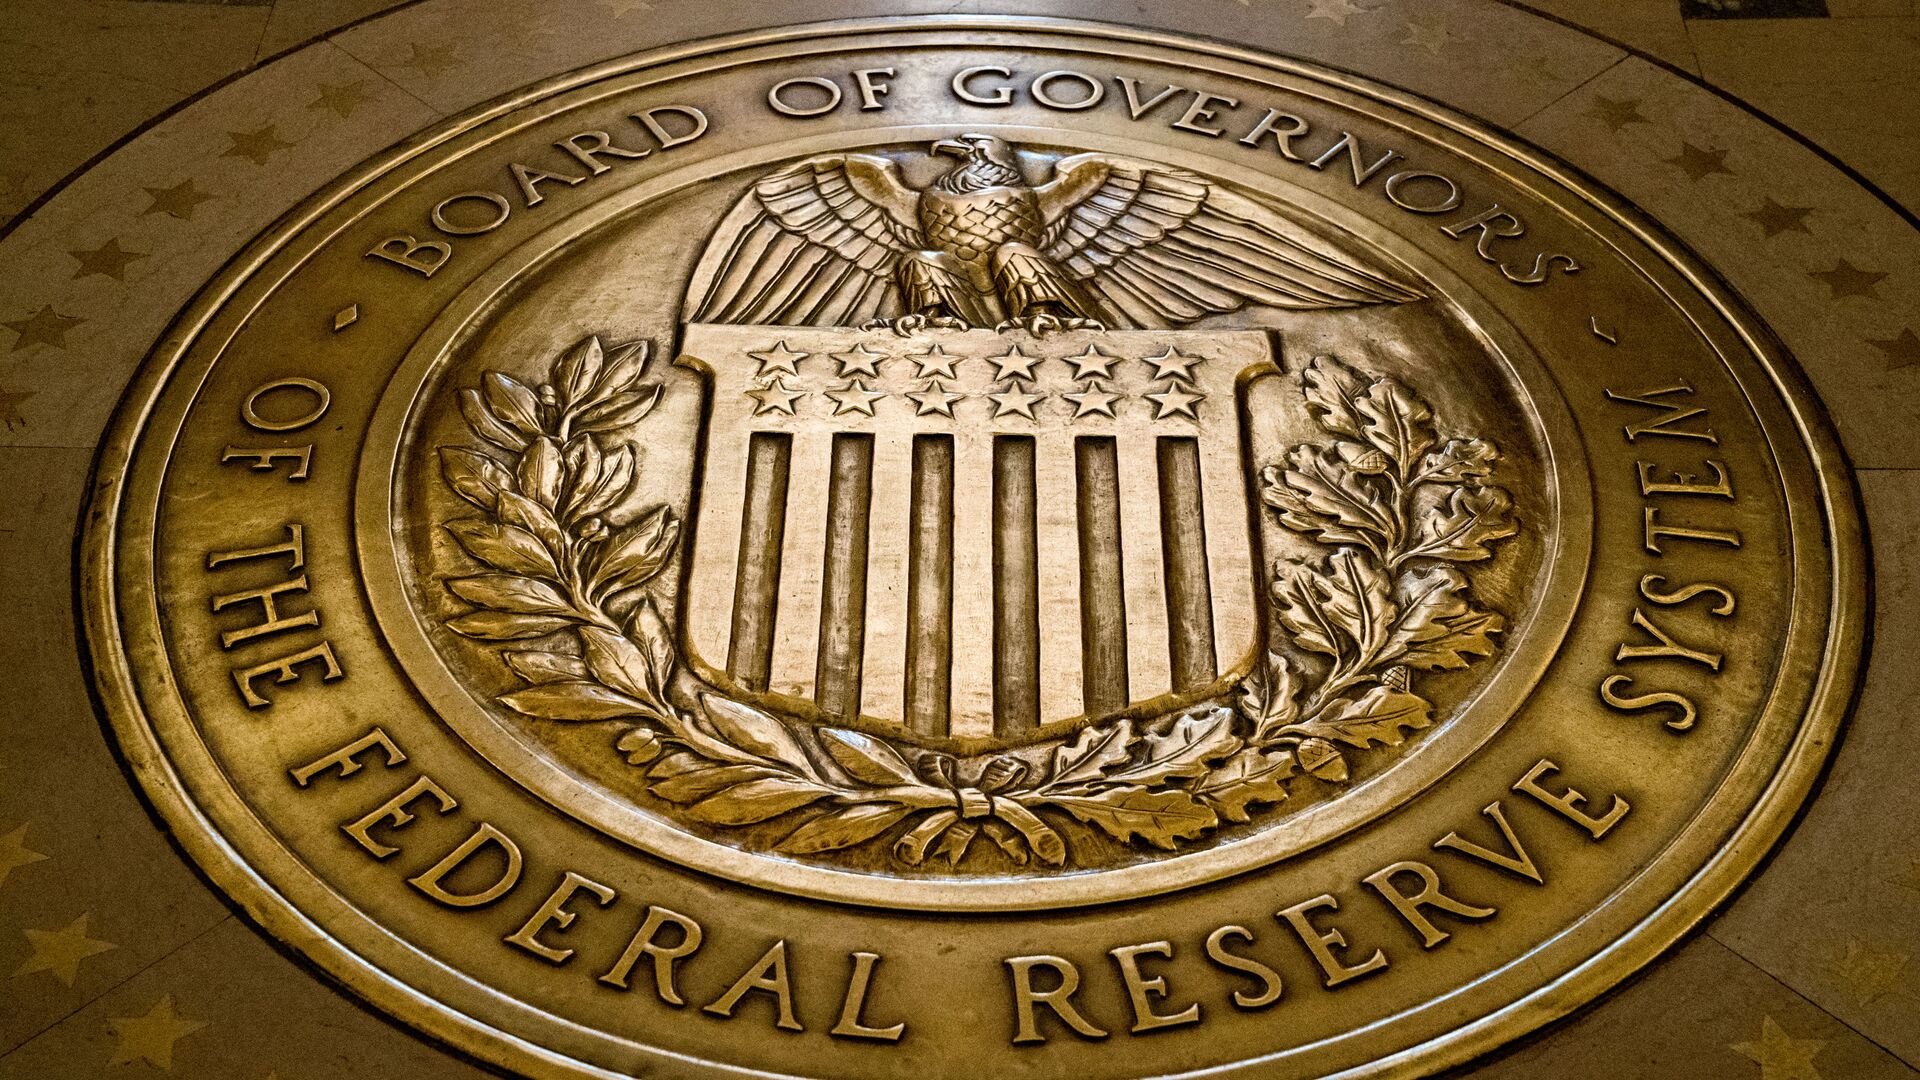 FILE- In this Feb. 5, 2018, file photo, the seal of the Board of Governors of the United States Federal Reserve System is displayed in the ground at the Marriner S. Eccles Federal Reserve Board Building in Washington. Richard Clarida, President Donald Trump's nominee for the No. 2 post at the Federal Reserve, pledged on Tuesday, May 15, to support the Fed's twin goals of stabilizing inflation and maximizing employment while also declaring the importance of the central bank’s independence.  - Sputnik International, 1920, 24.02.2021